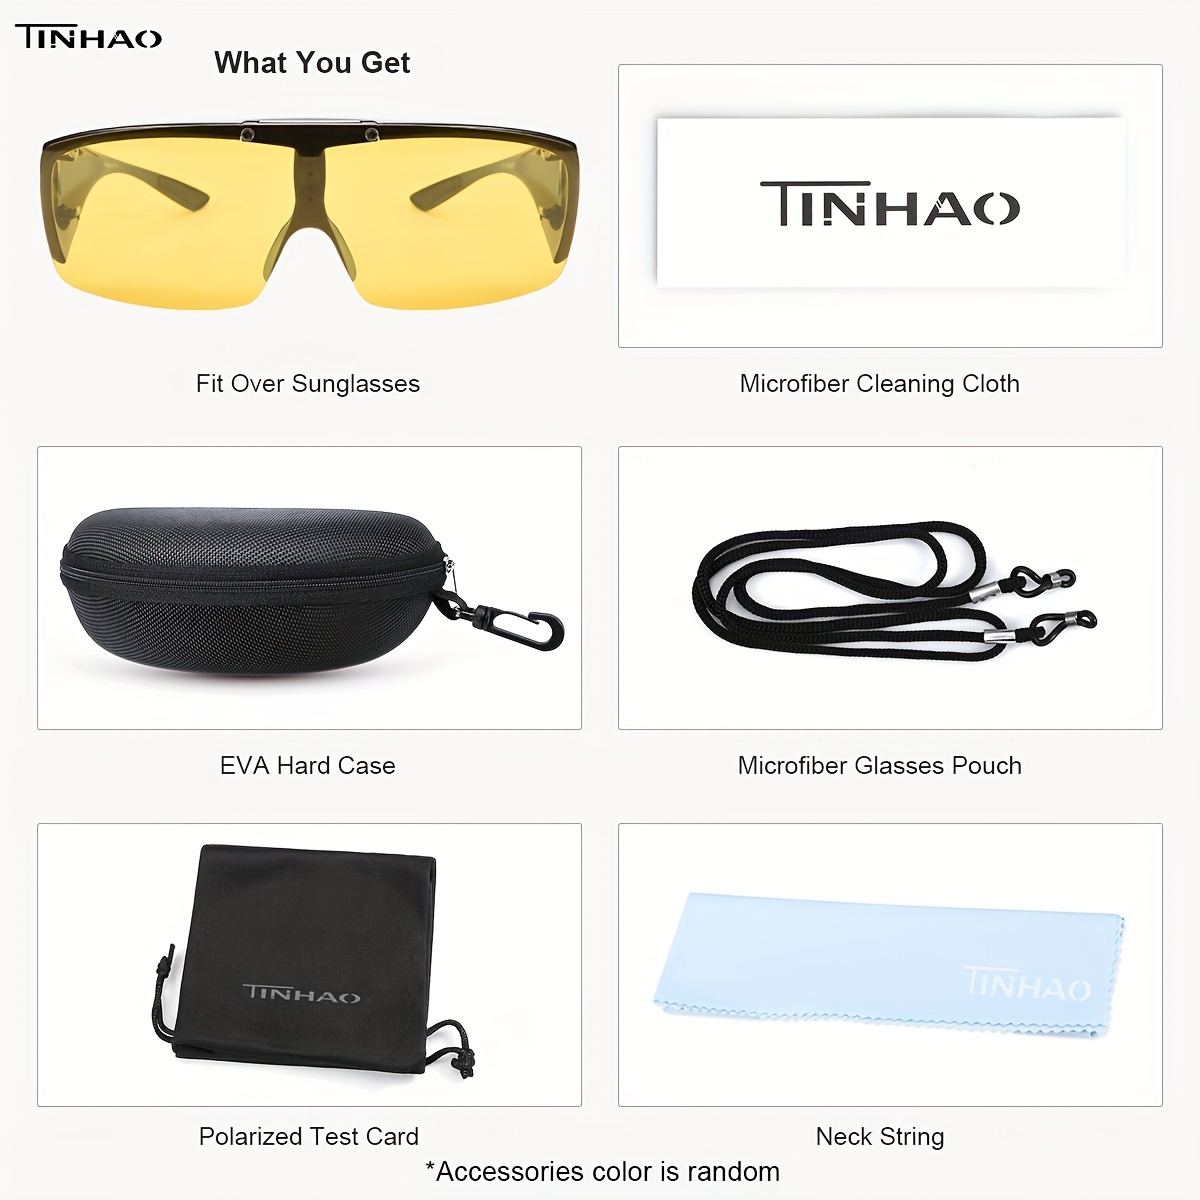 TINHAO Headlight Night Vision Driving Fit Over Sunglasses with Flip Up Lens